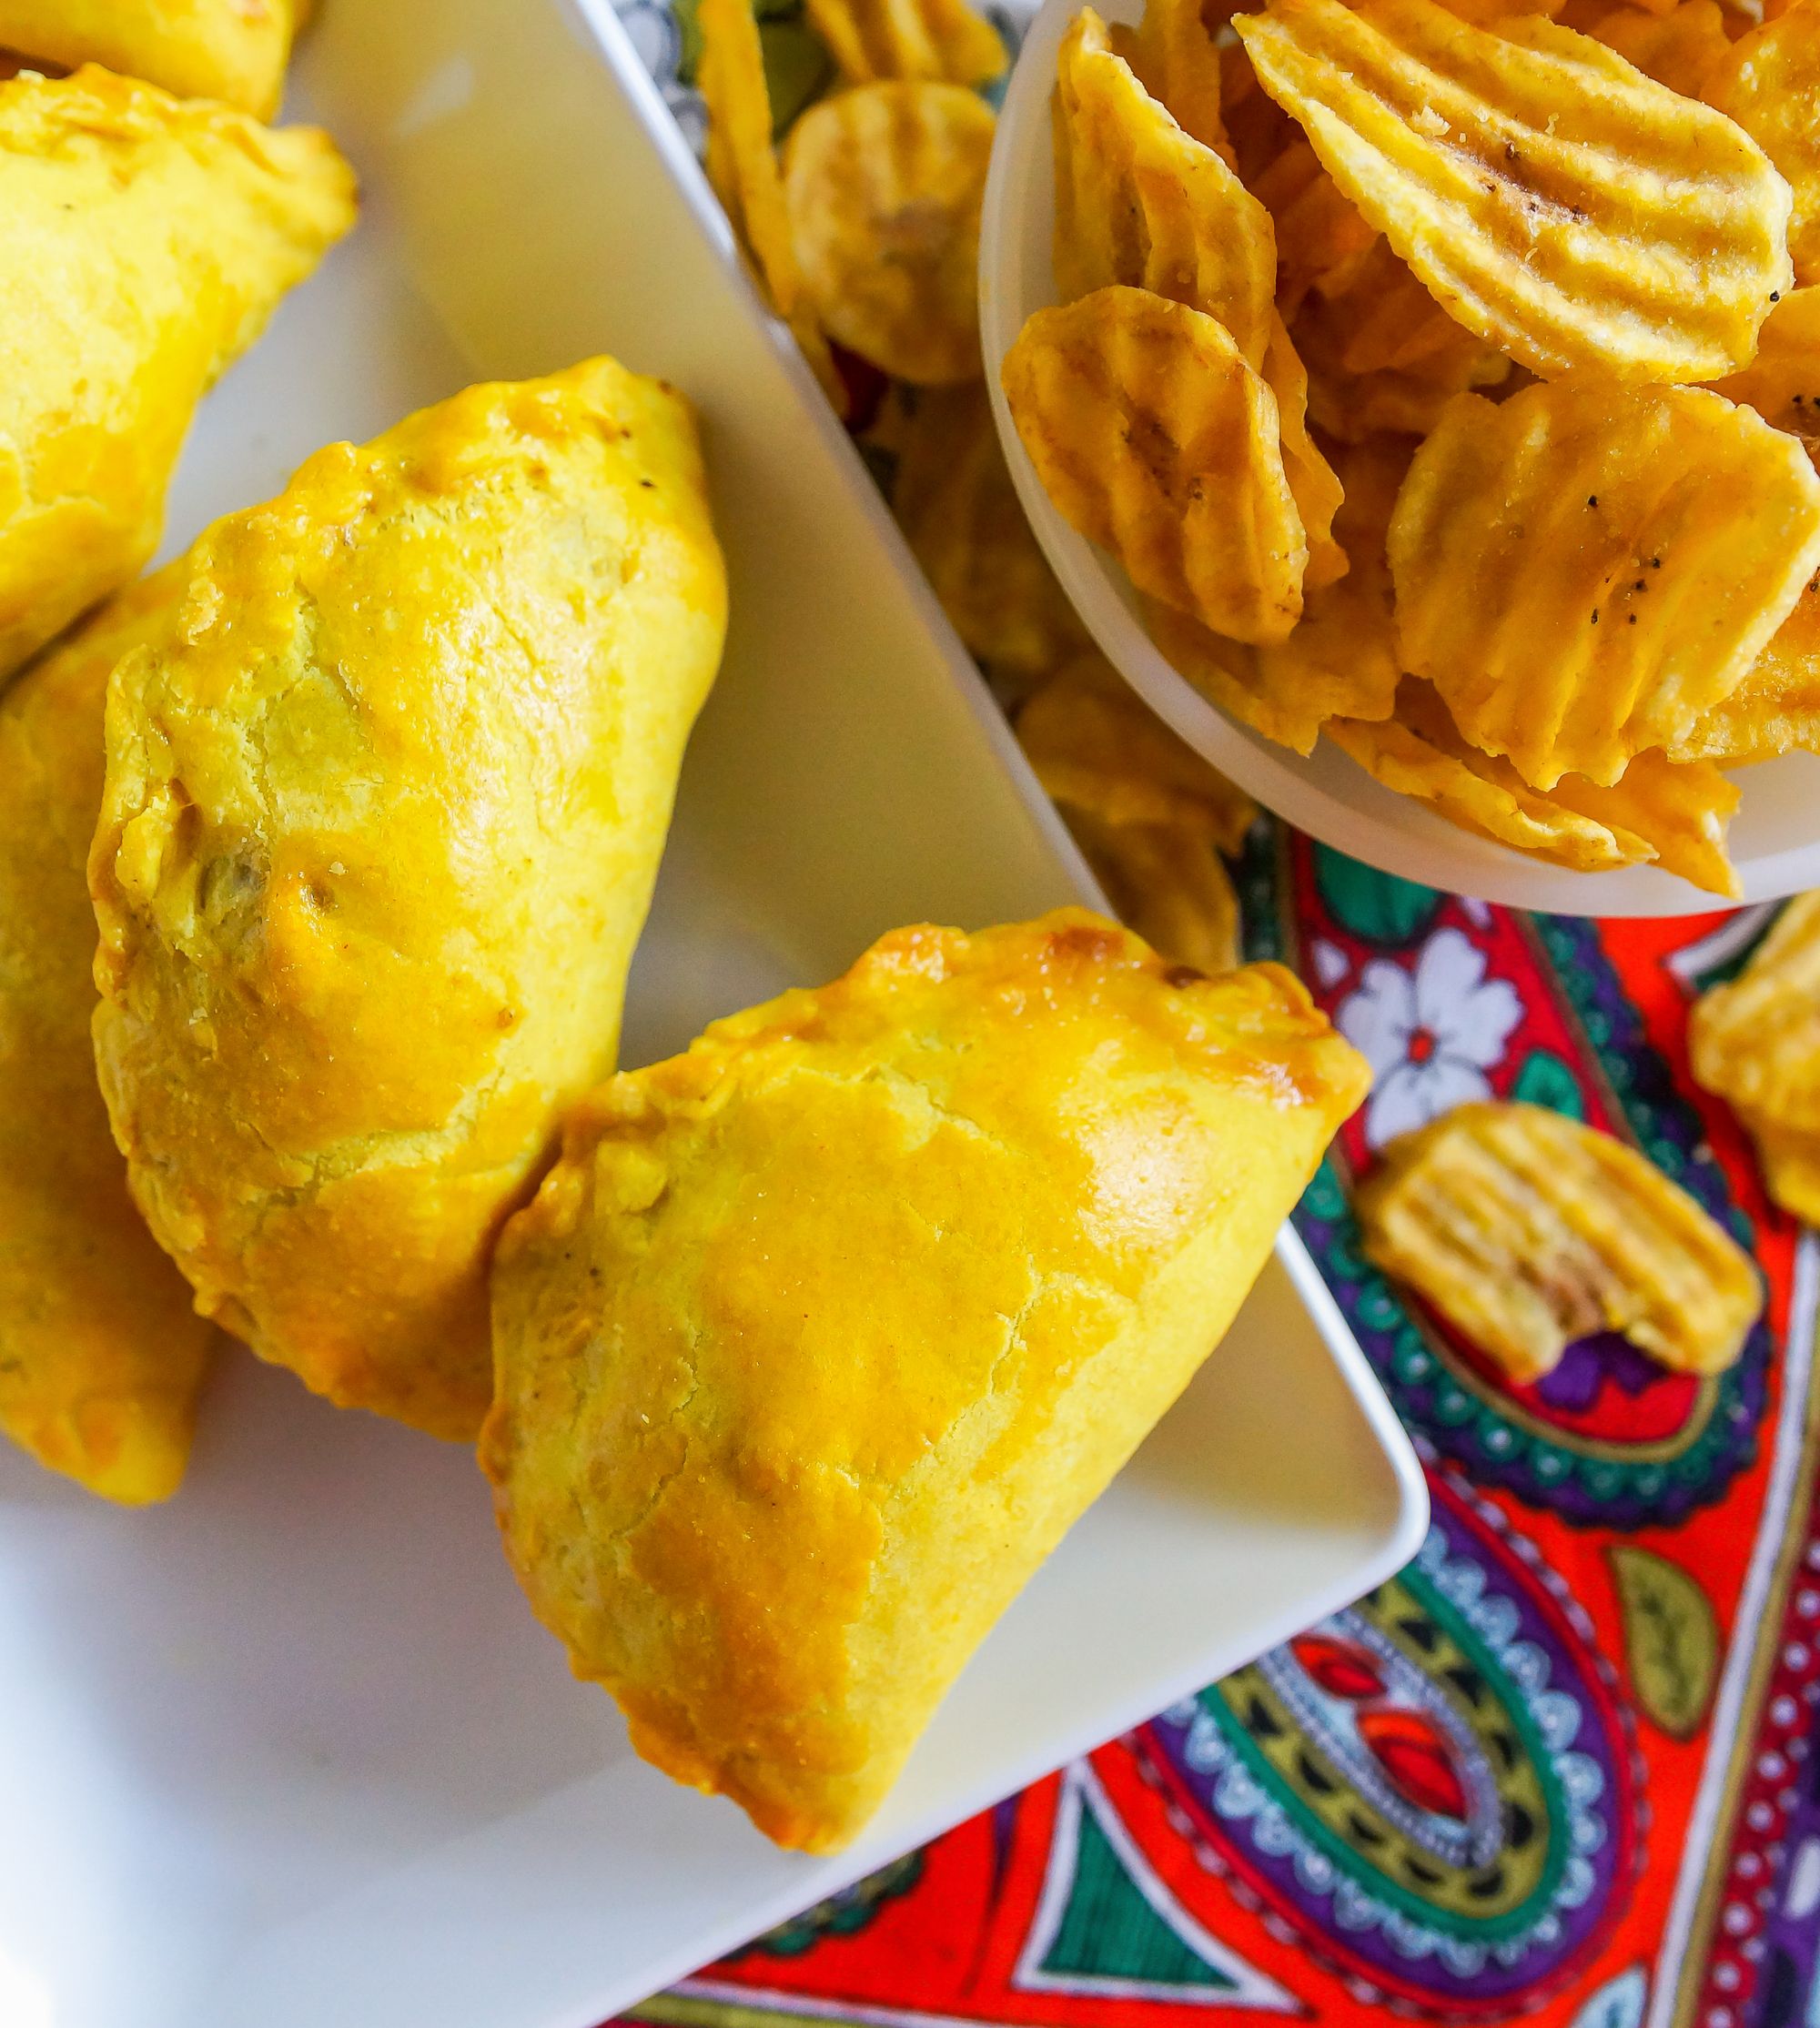 Jamaican Beef Patties - Homemade from Scratch by Flawless Food